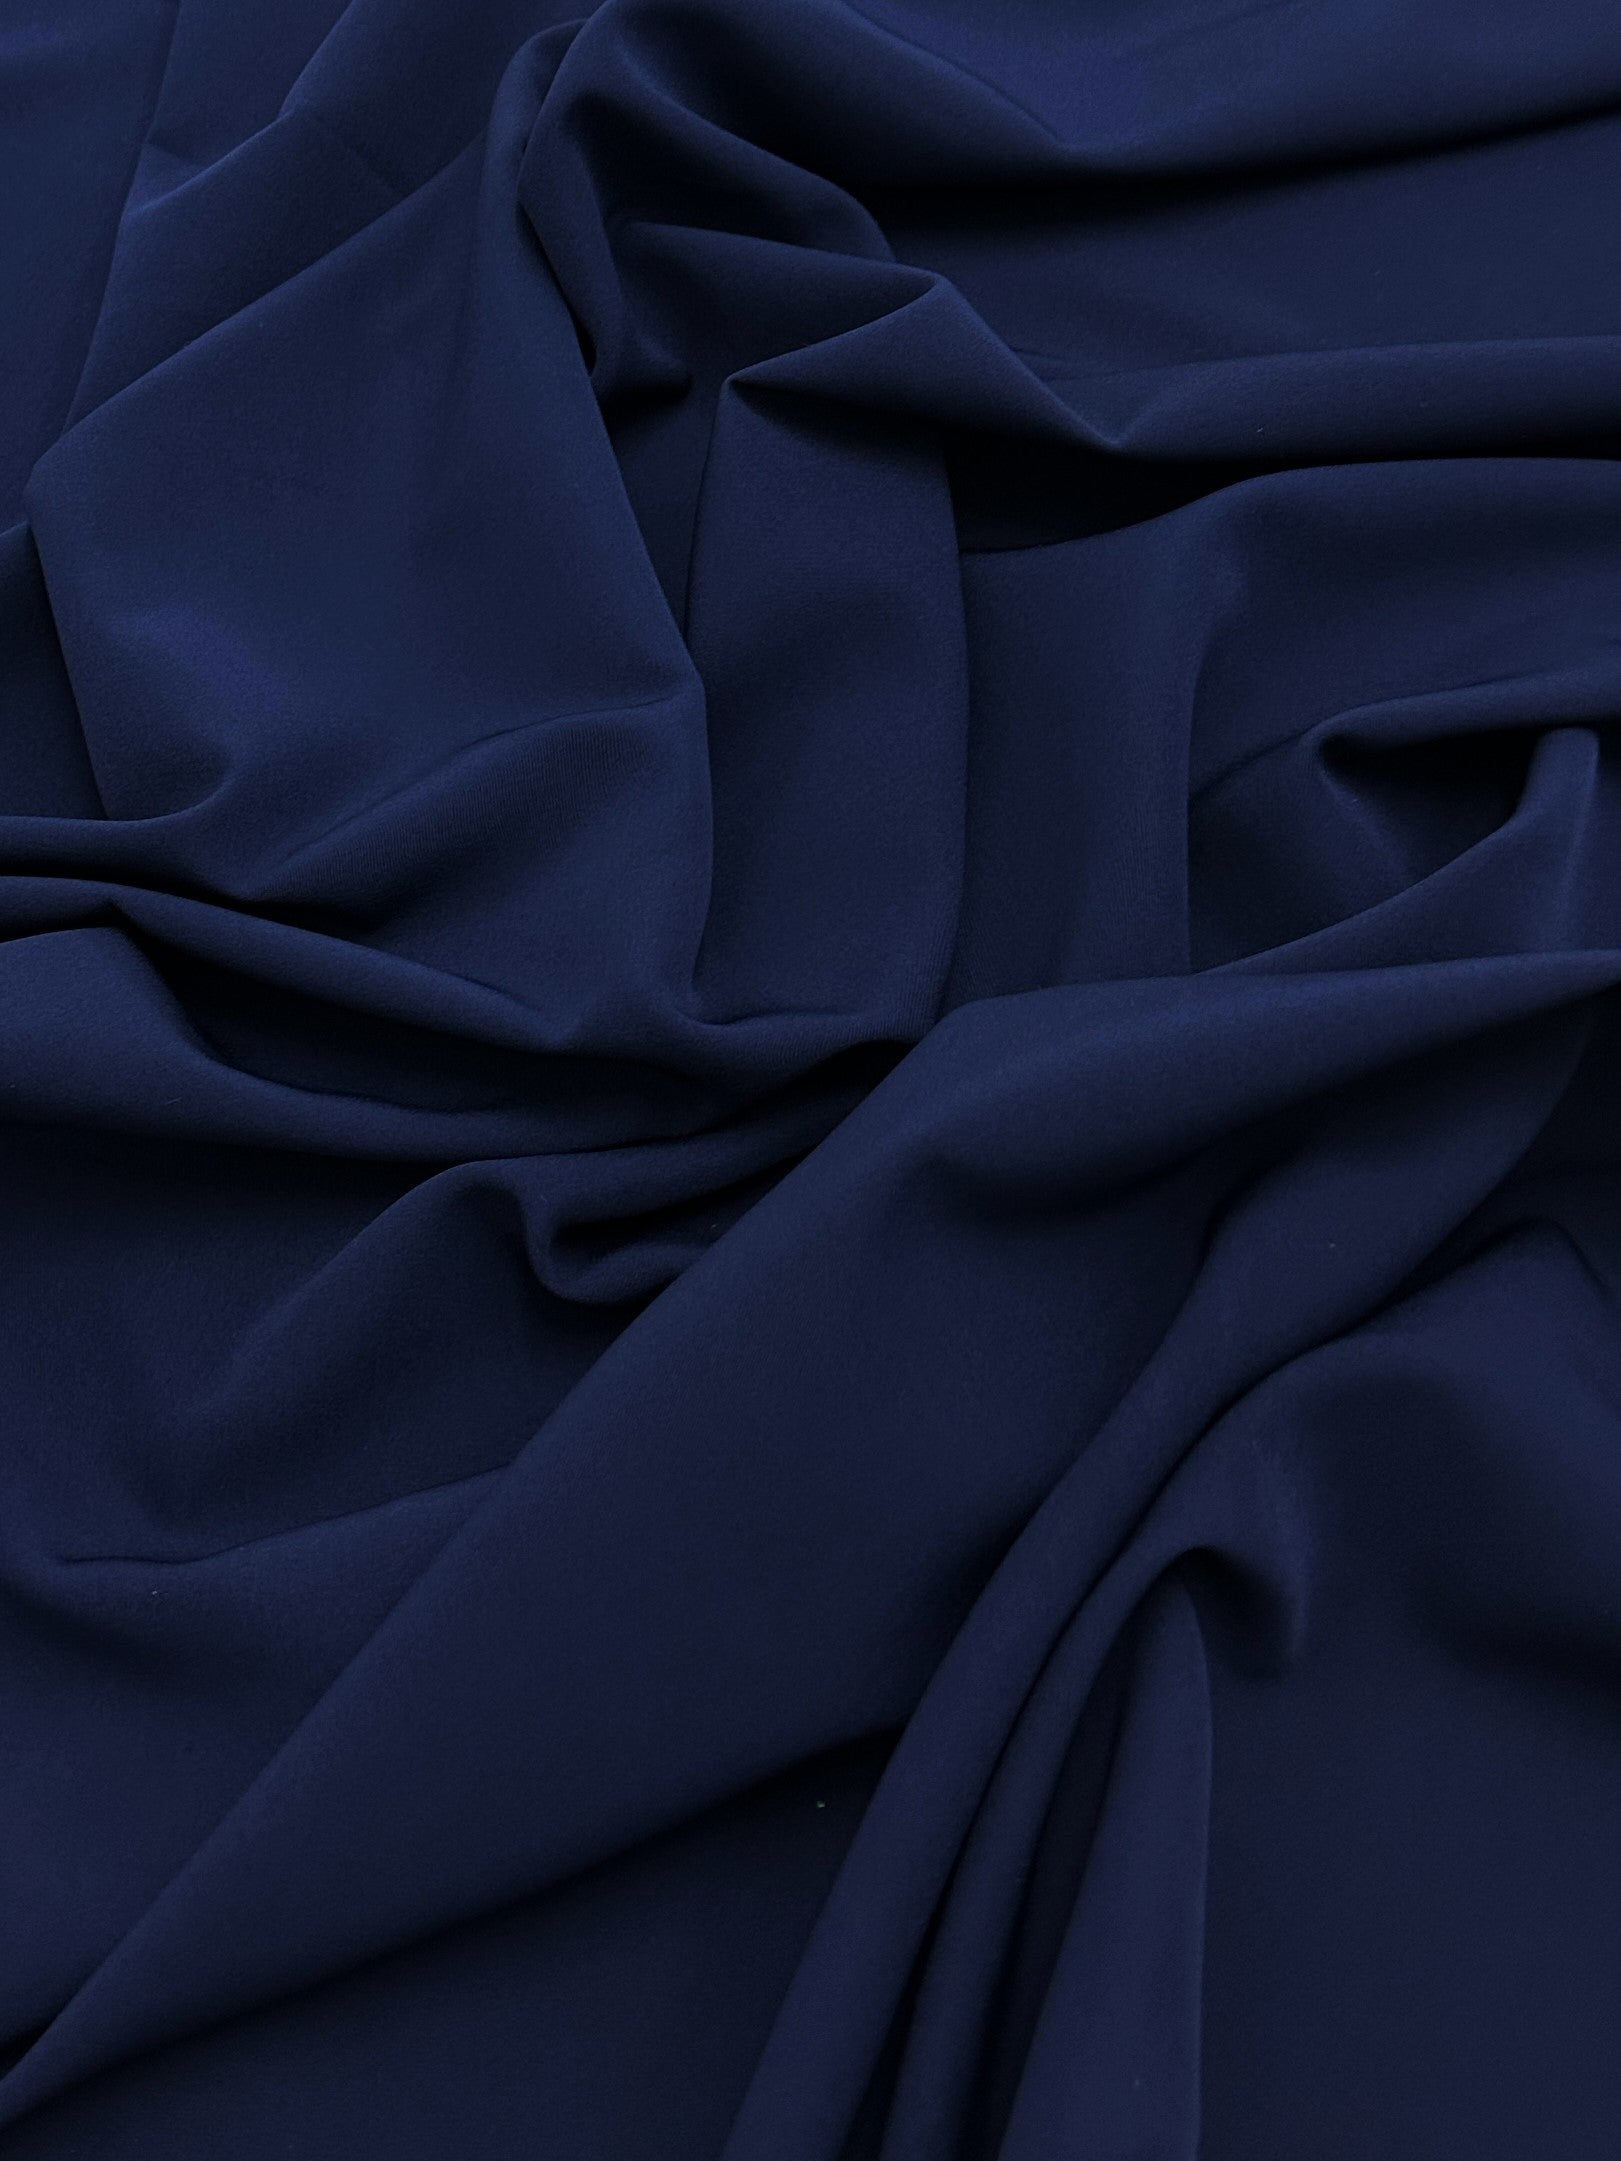 navy stretch crepe, navy blue stretch crepe, blue crepe fabric, crepe clothing material, silk crepe, crepe satin, crepe for dress, pure crepe fabric, crepe on sale, wedding crepe, crepe fabric store usa